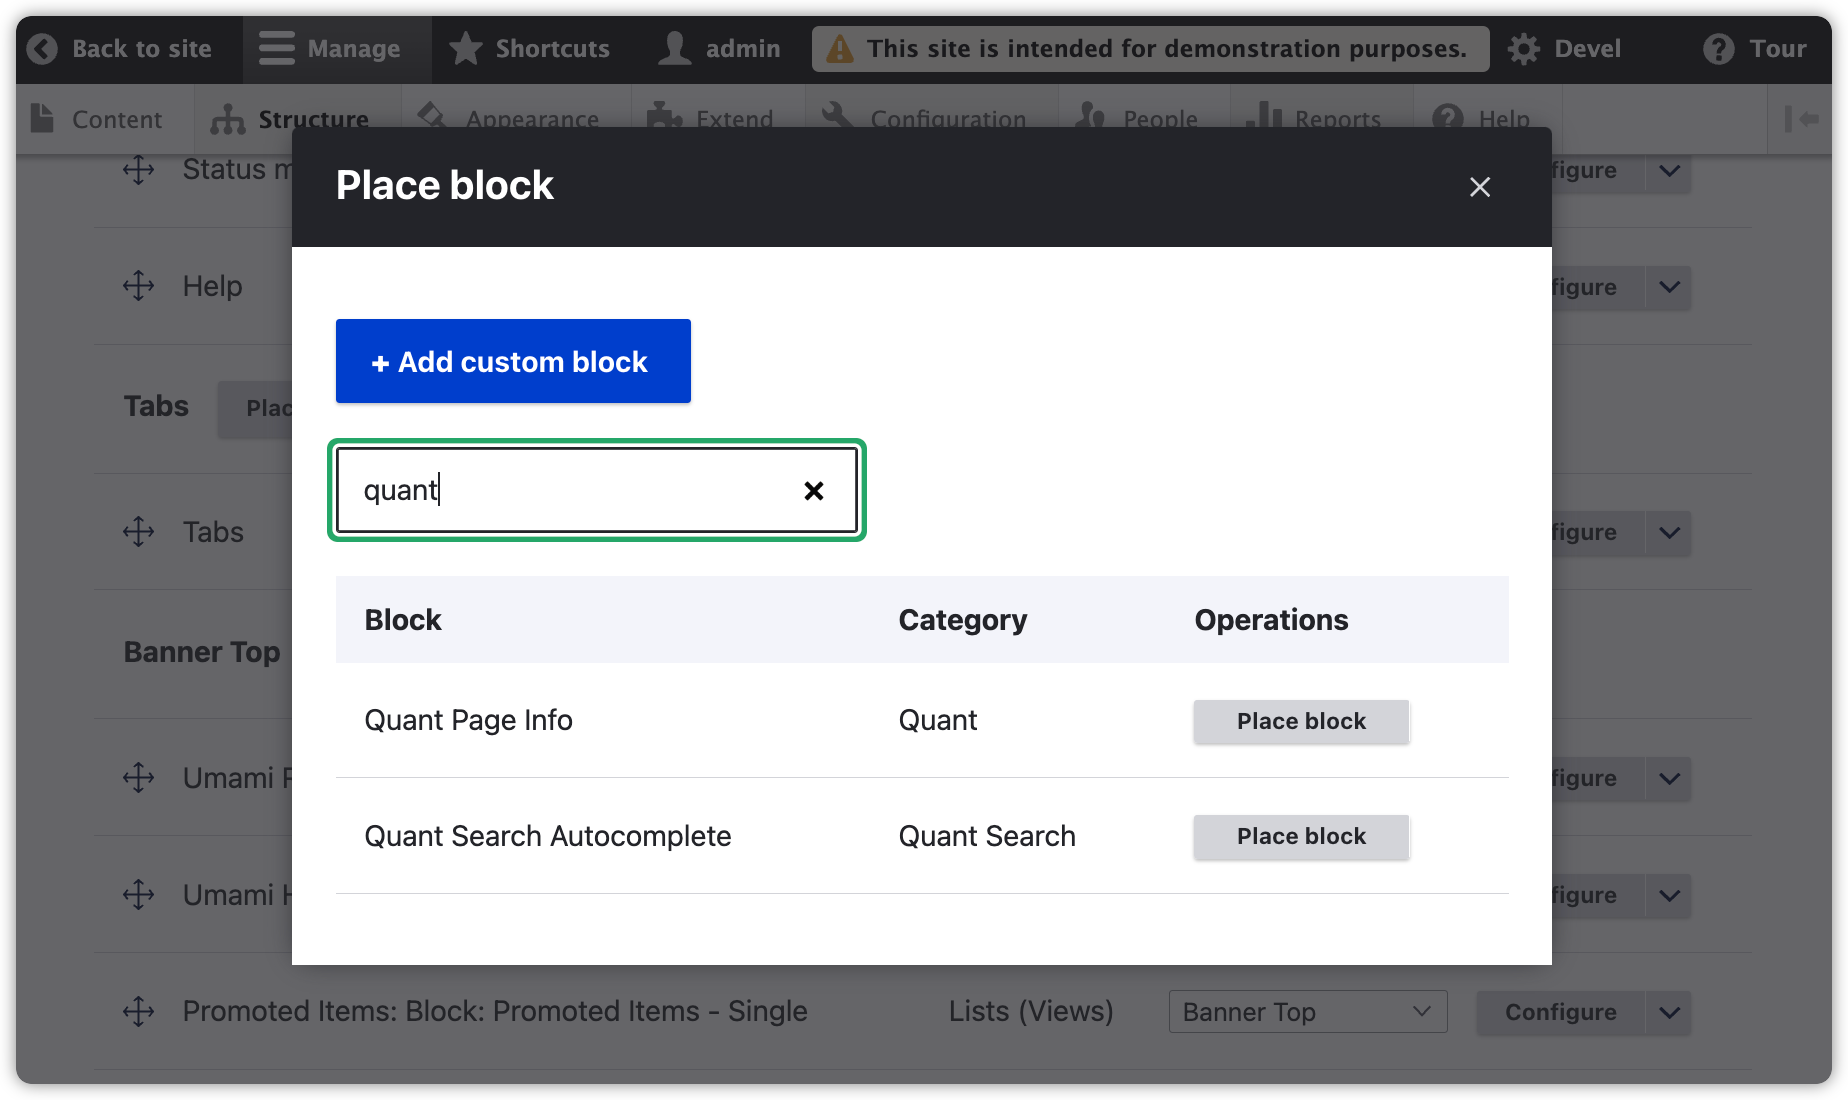 Screenshot of Quant page info block placement in block layout